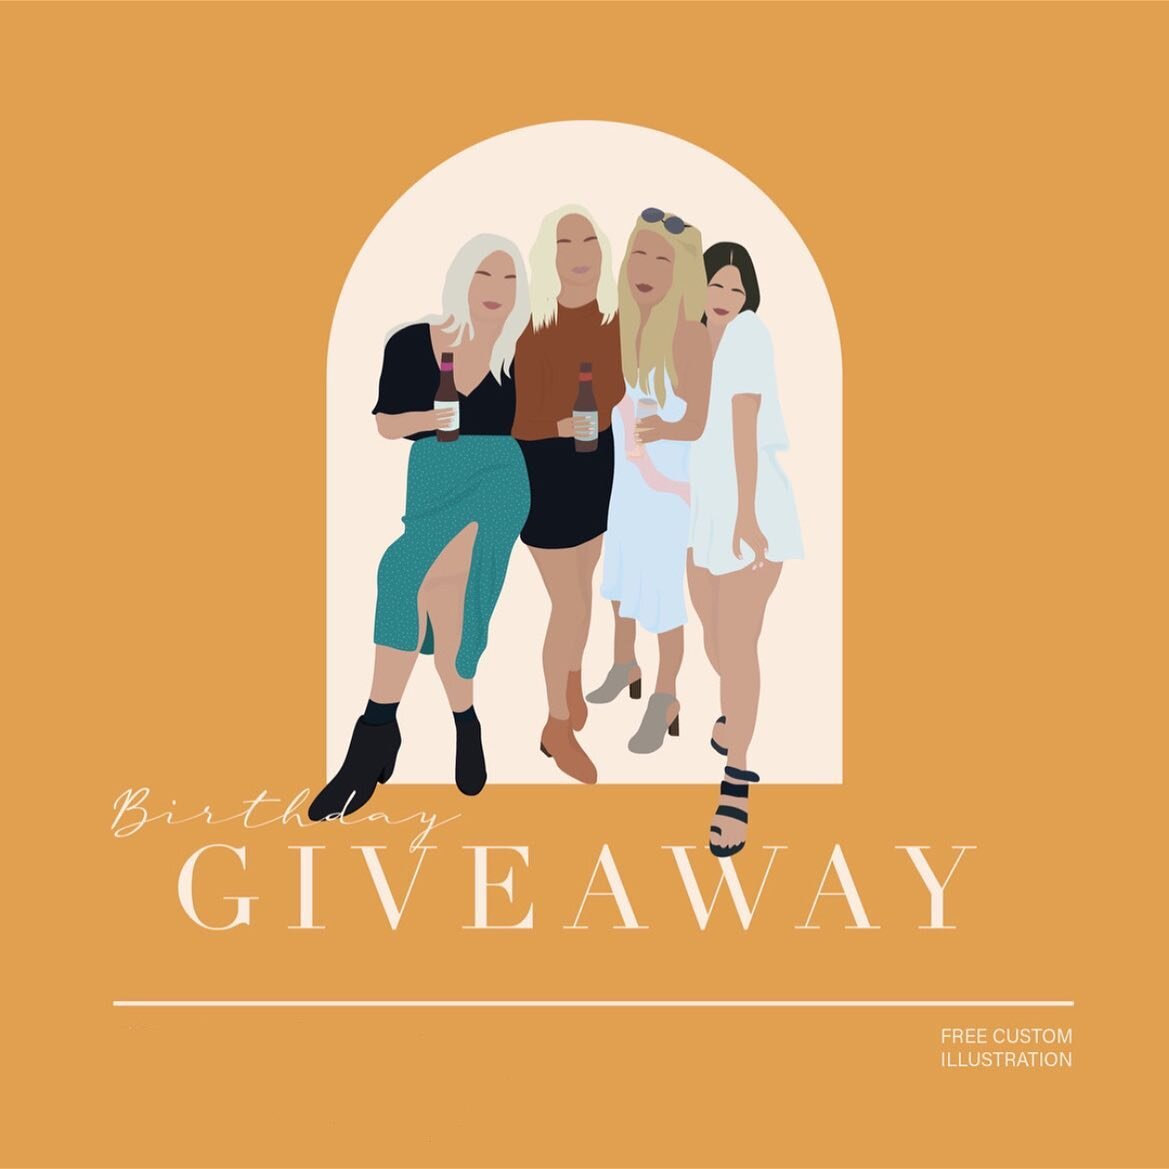 Giveaway closed 🧡

It's my BIRTHDAY GIVEAWAY!!
⠀⠀⠀⠀⠀⠀⠀⠀⠀
One winner will be given a free illustration!! Unlimited amount of people or pets included. All you have to do is:
⠀⠀⠀⠀⠀⠀⠀⠀⠀
1. Like this post 
2. Follow @chansondhu.designs 
3. Tag a bestie o